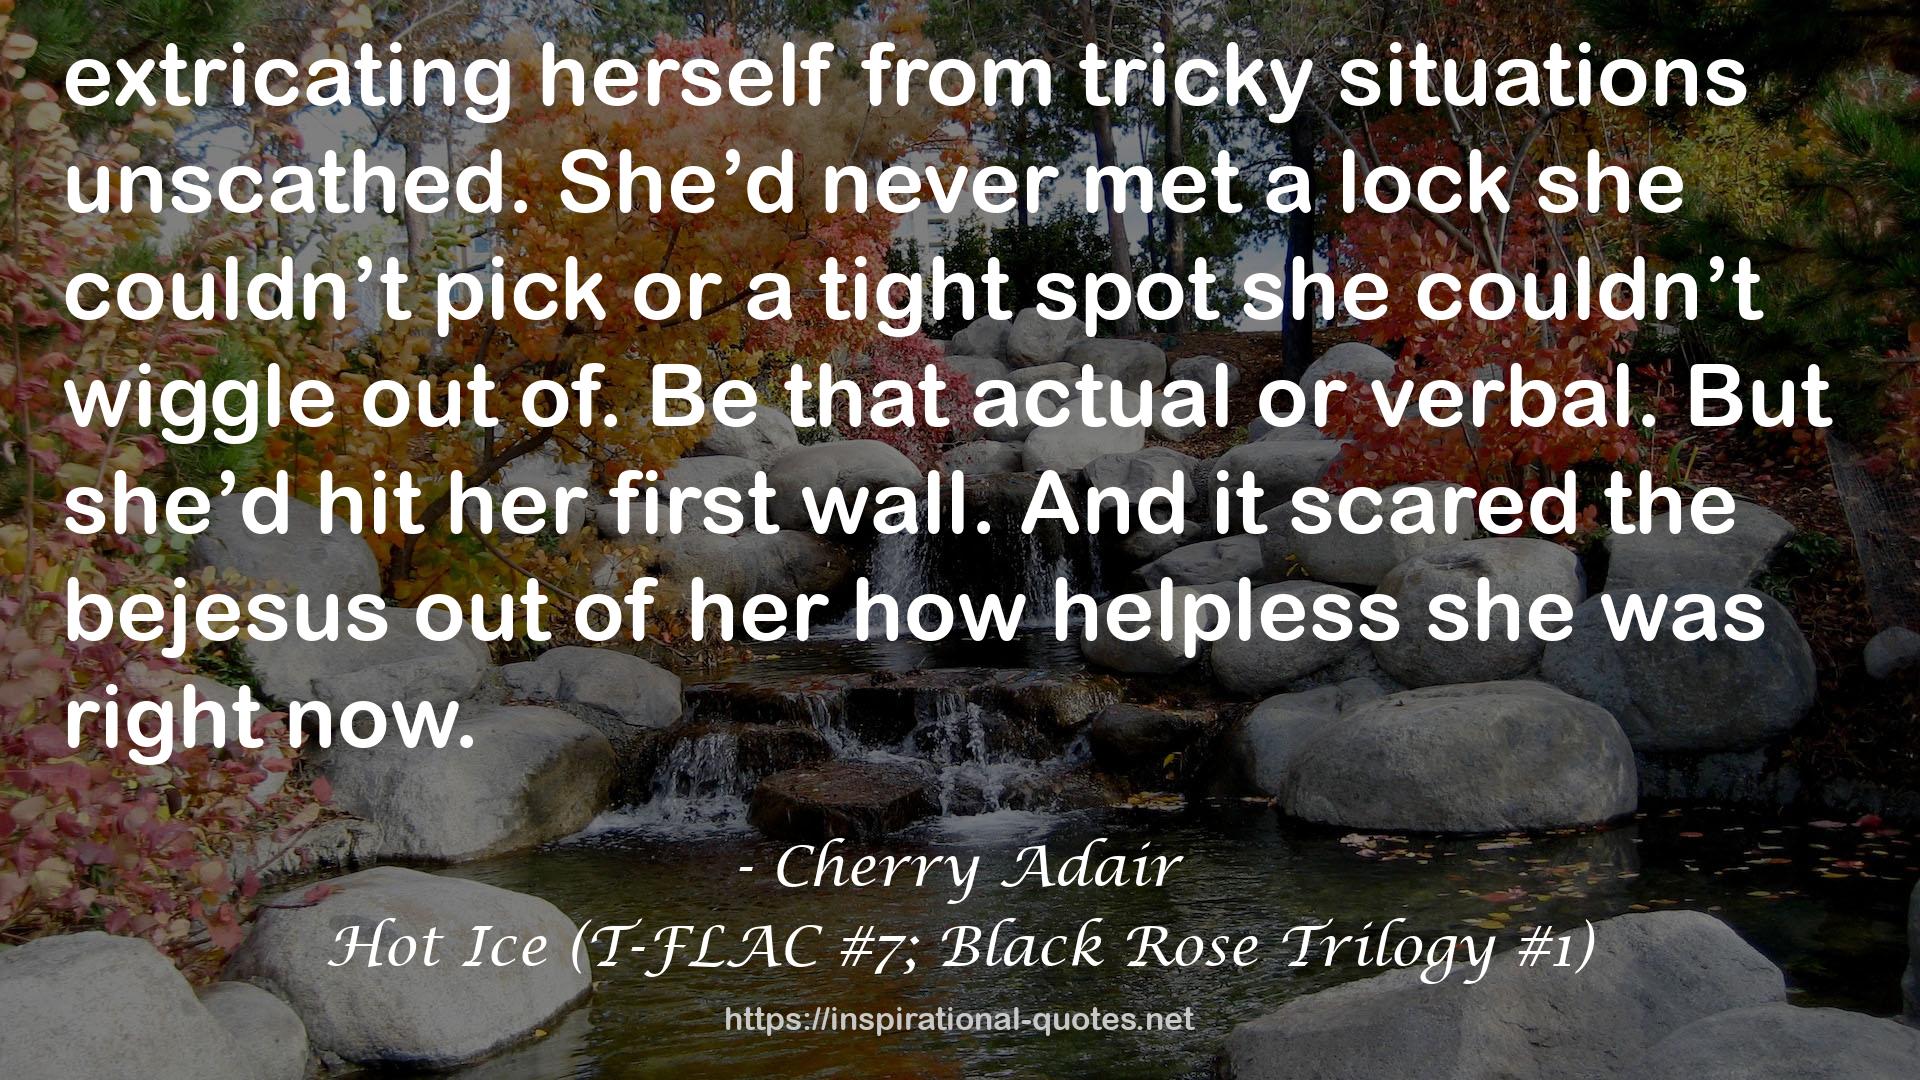 Hot Ice (T-FLAC #7; Black Rose Trilogy #1) QUOTES